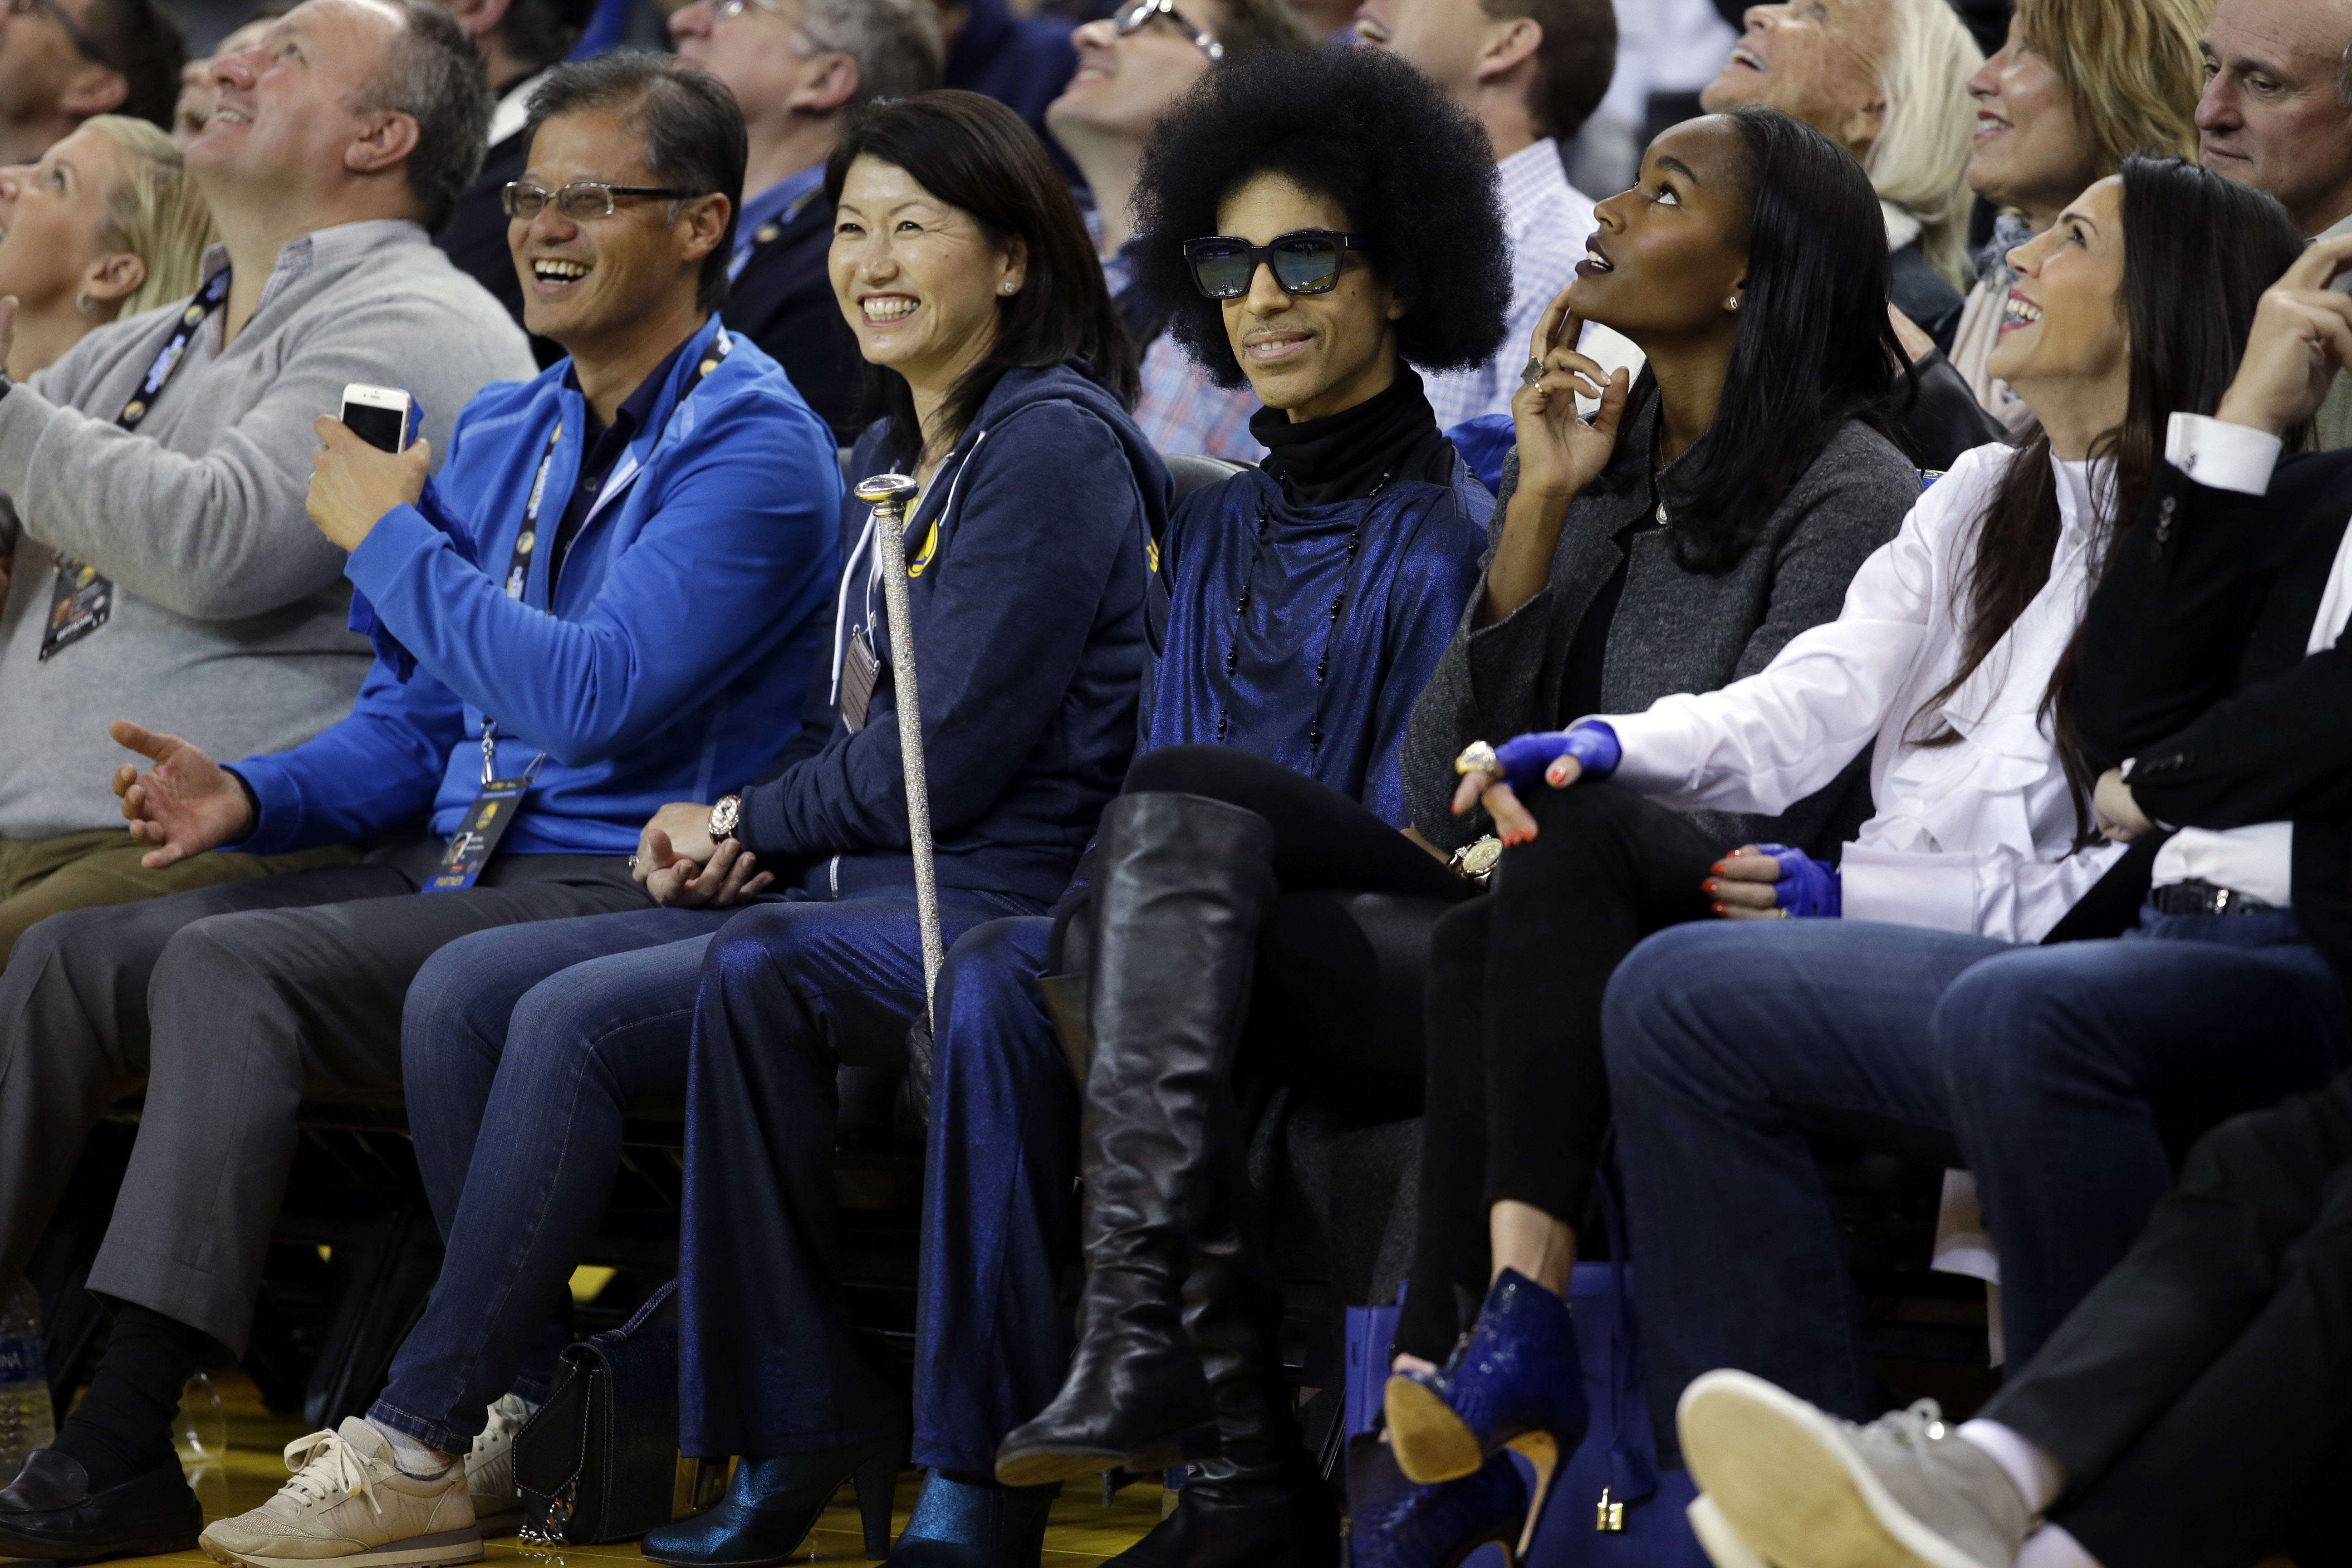 Prince rocking a cane at the Warriors game.